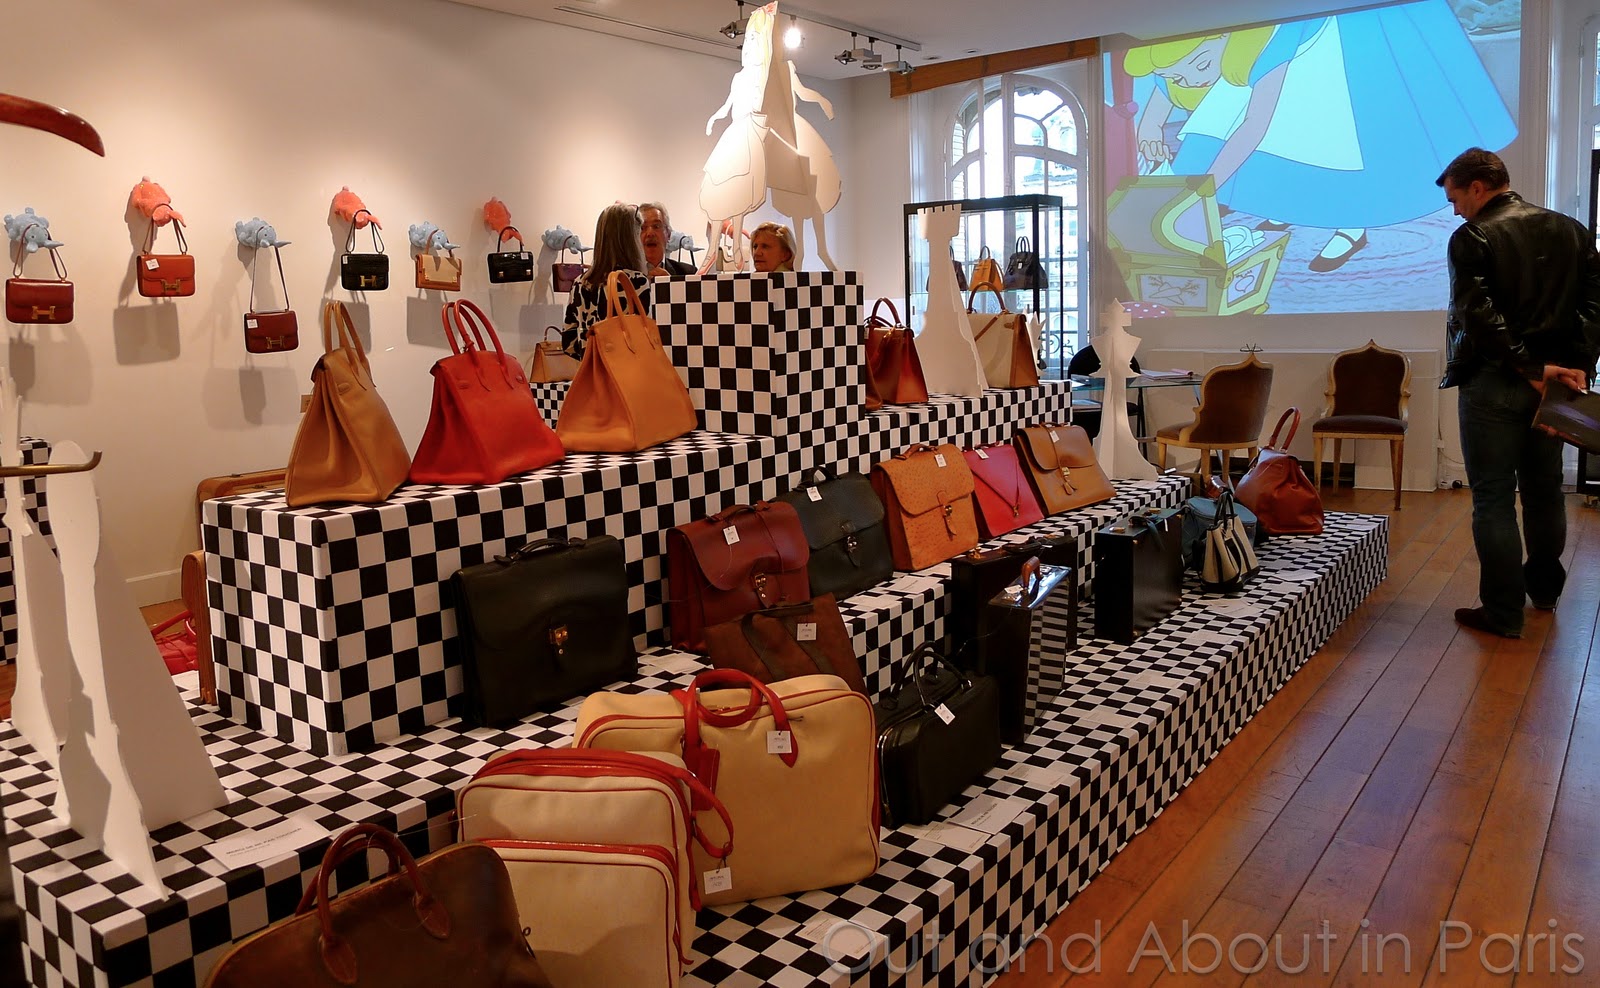 Trying to keep my paddle down at the annual vintage Hermes auction in Paris